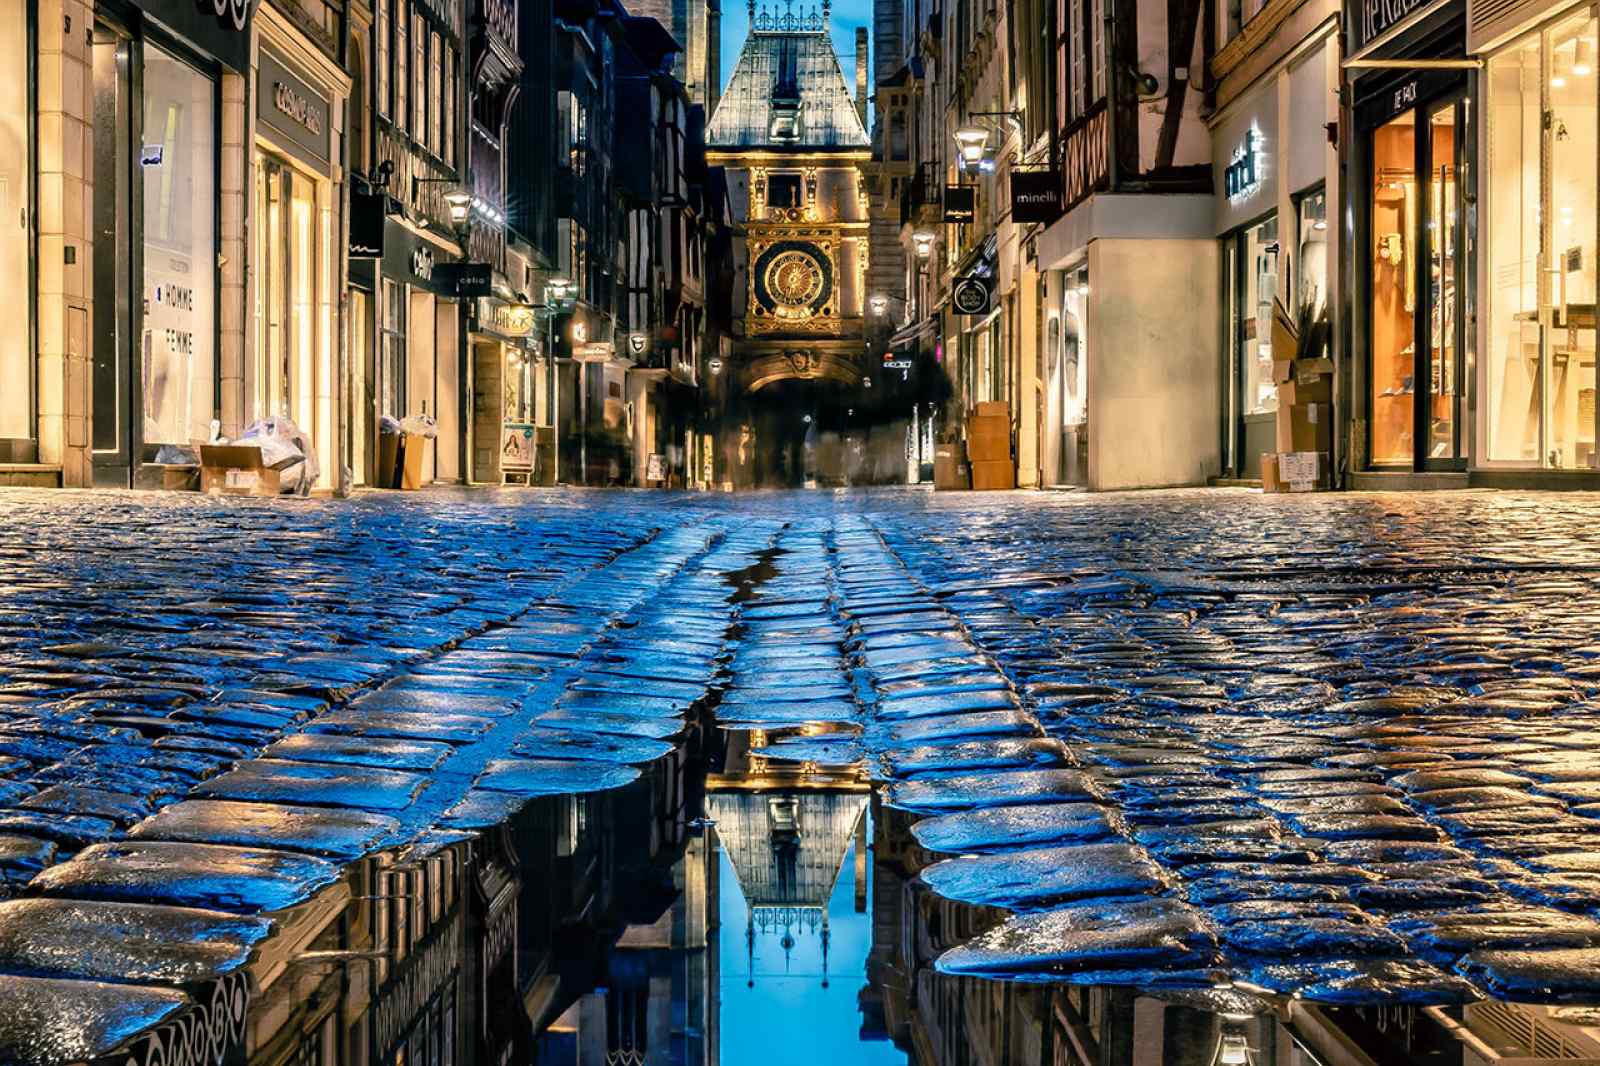 Reflections in Rouen (FR)